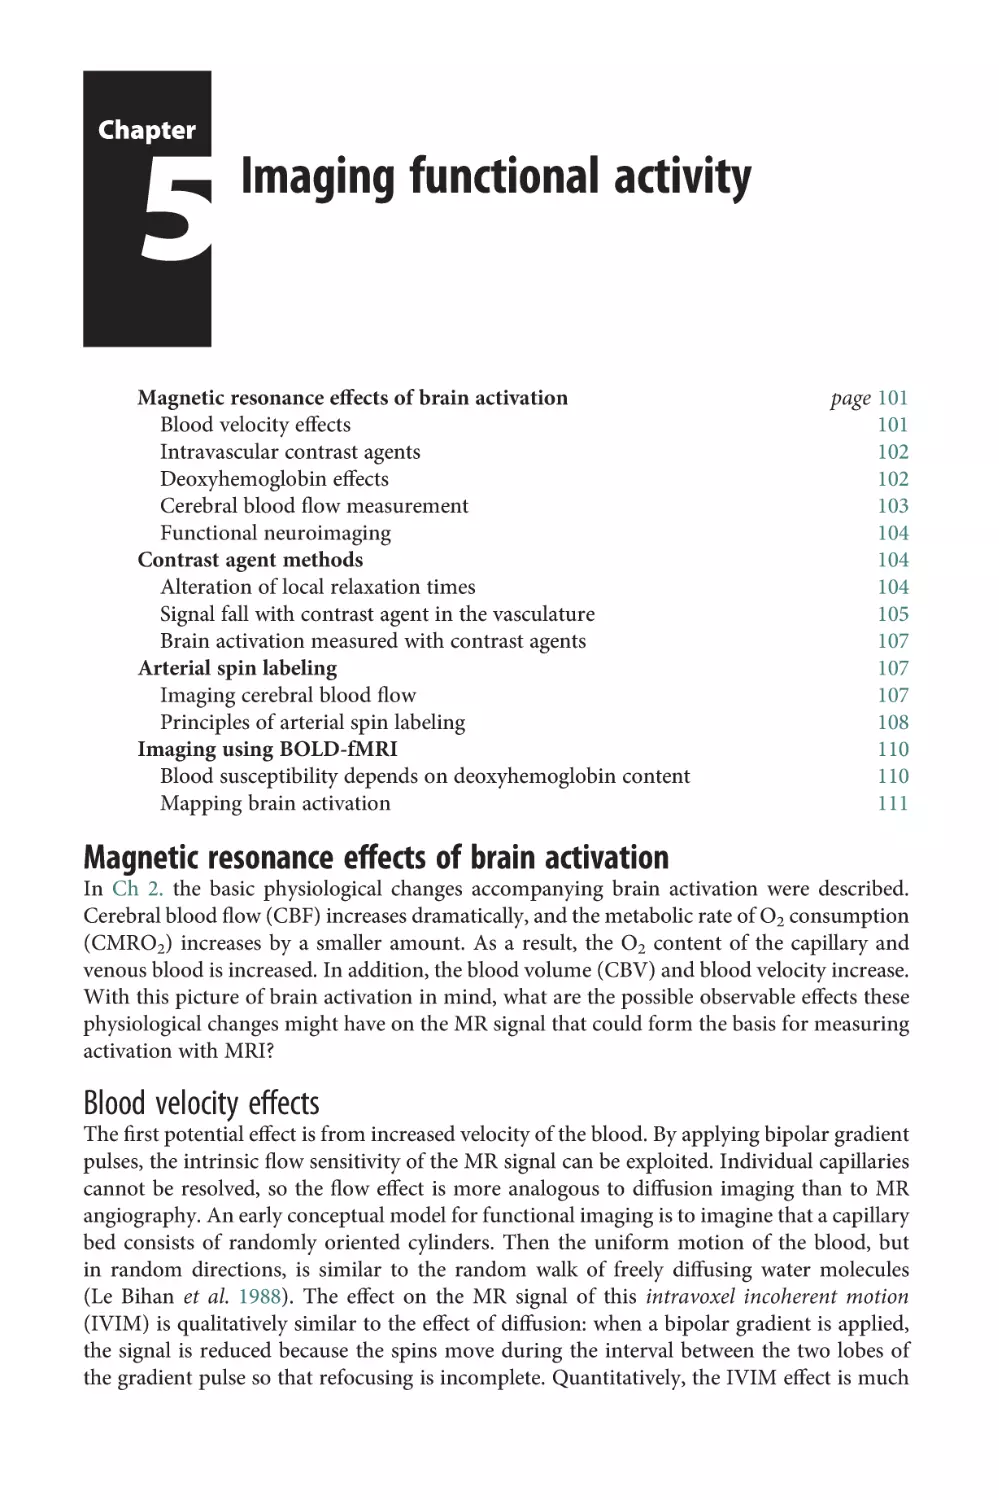 Chapter 5 Imaging functional activity
Magnetic resonance effects of brain activation
Blood velocity effects